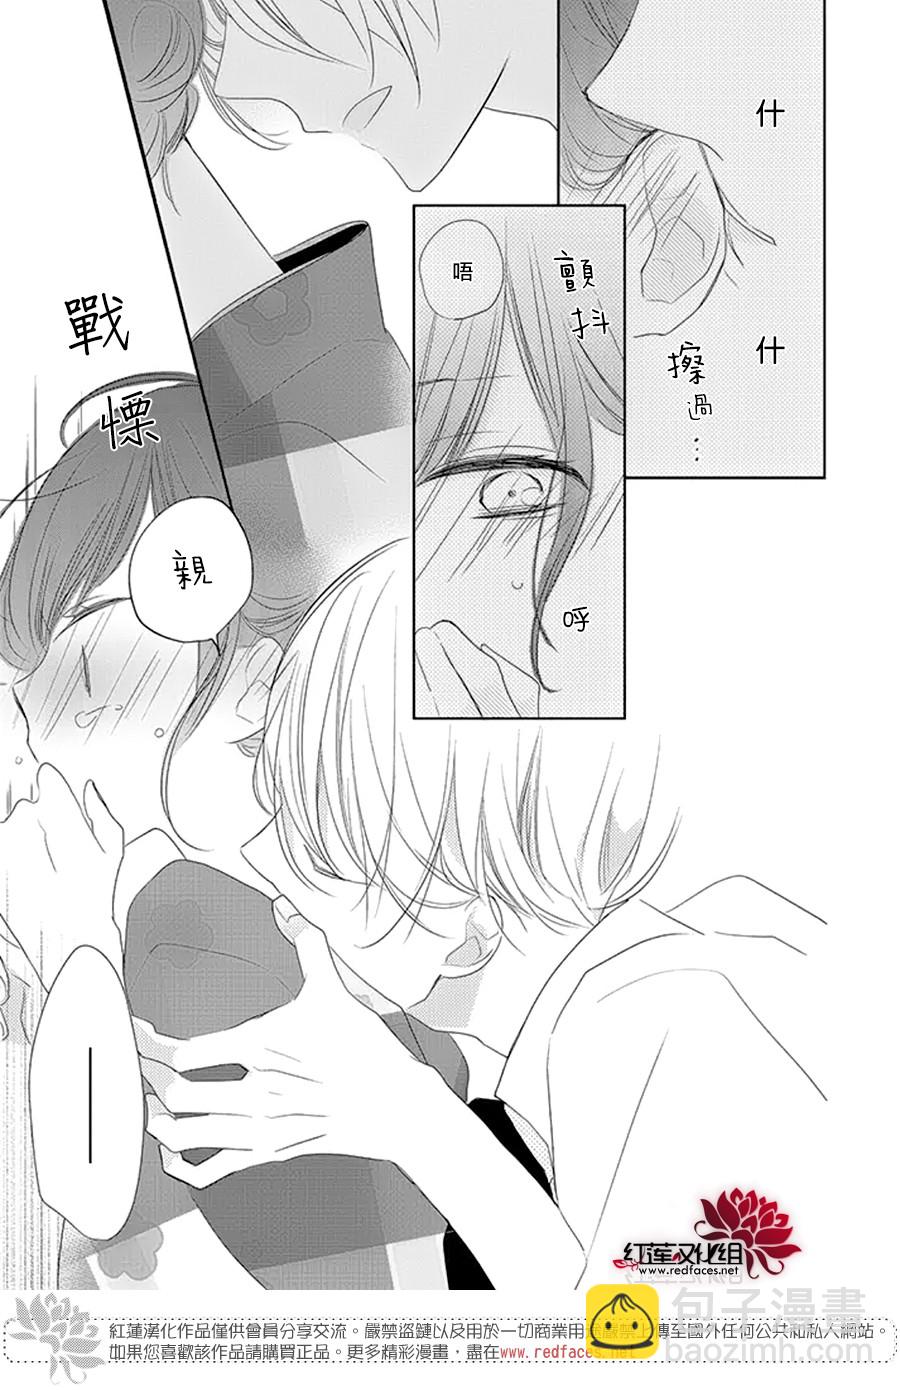 If given a second chance - 17話 - 3